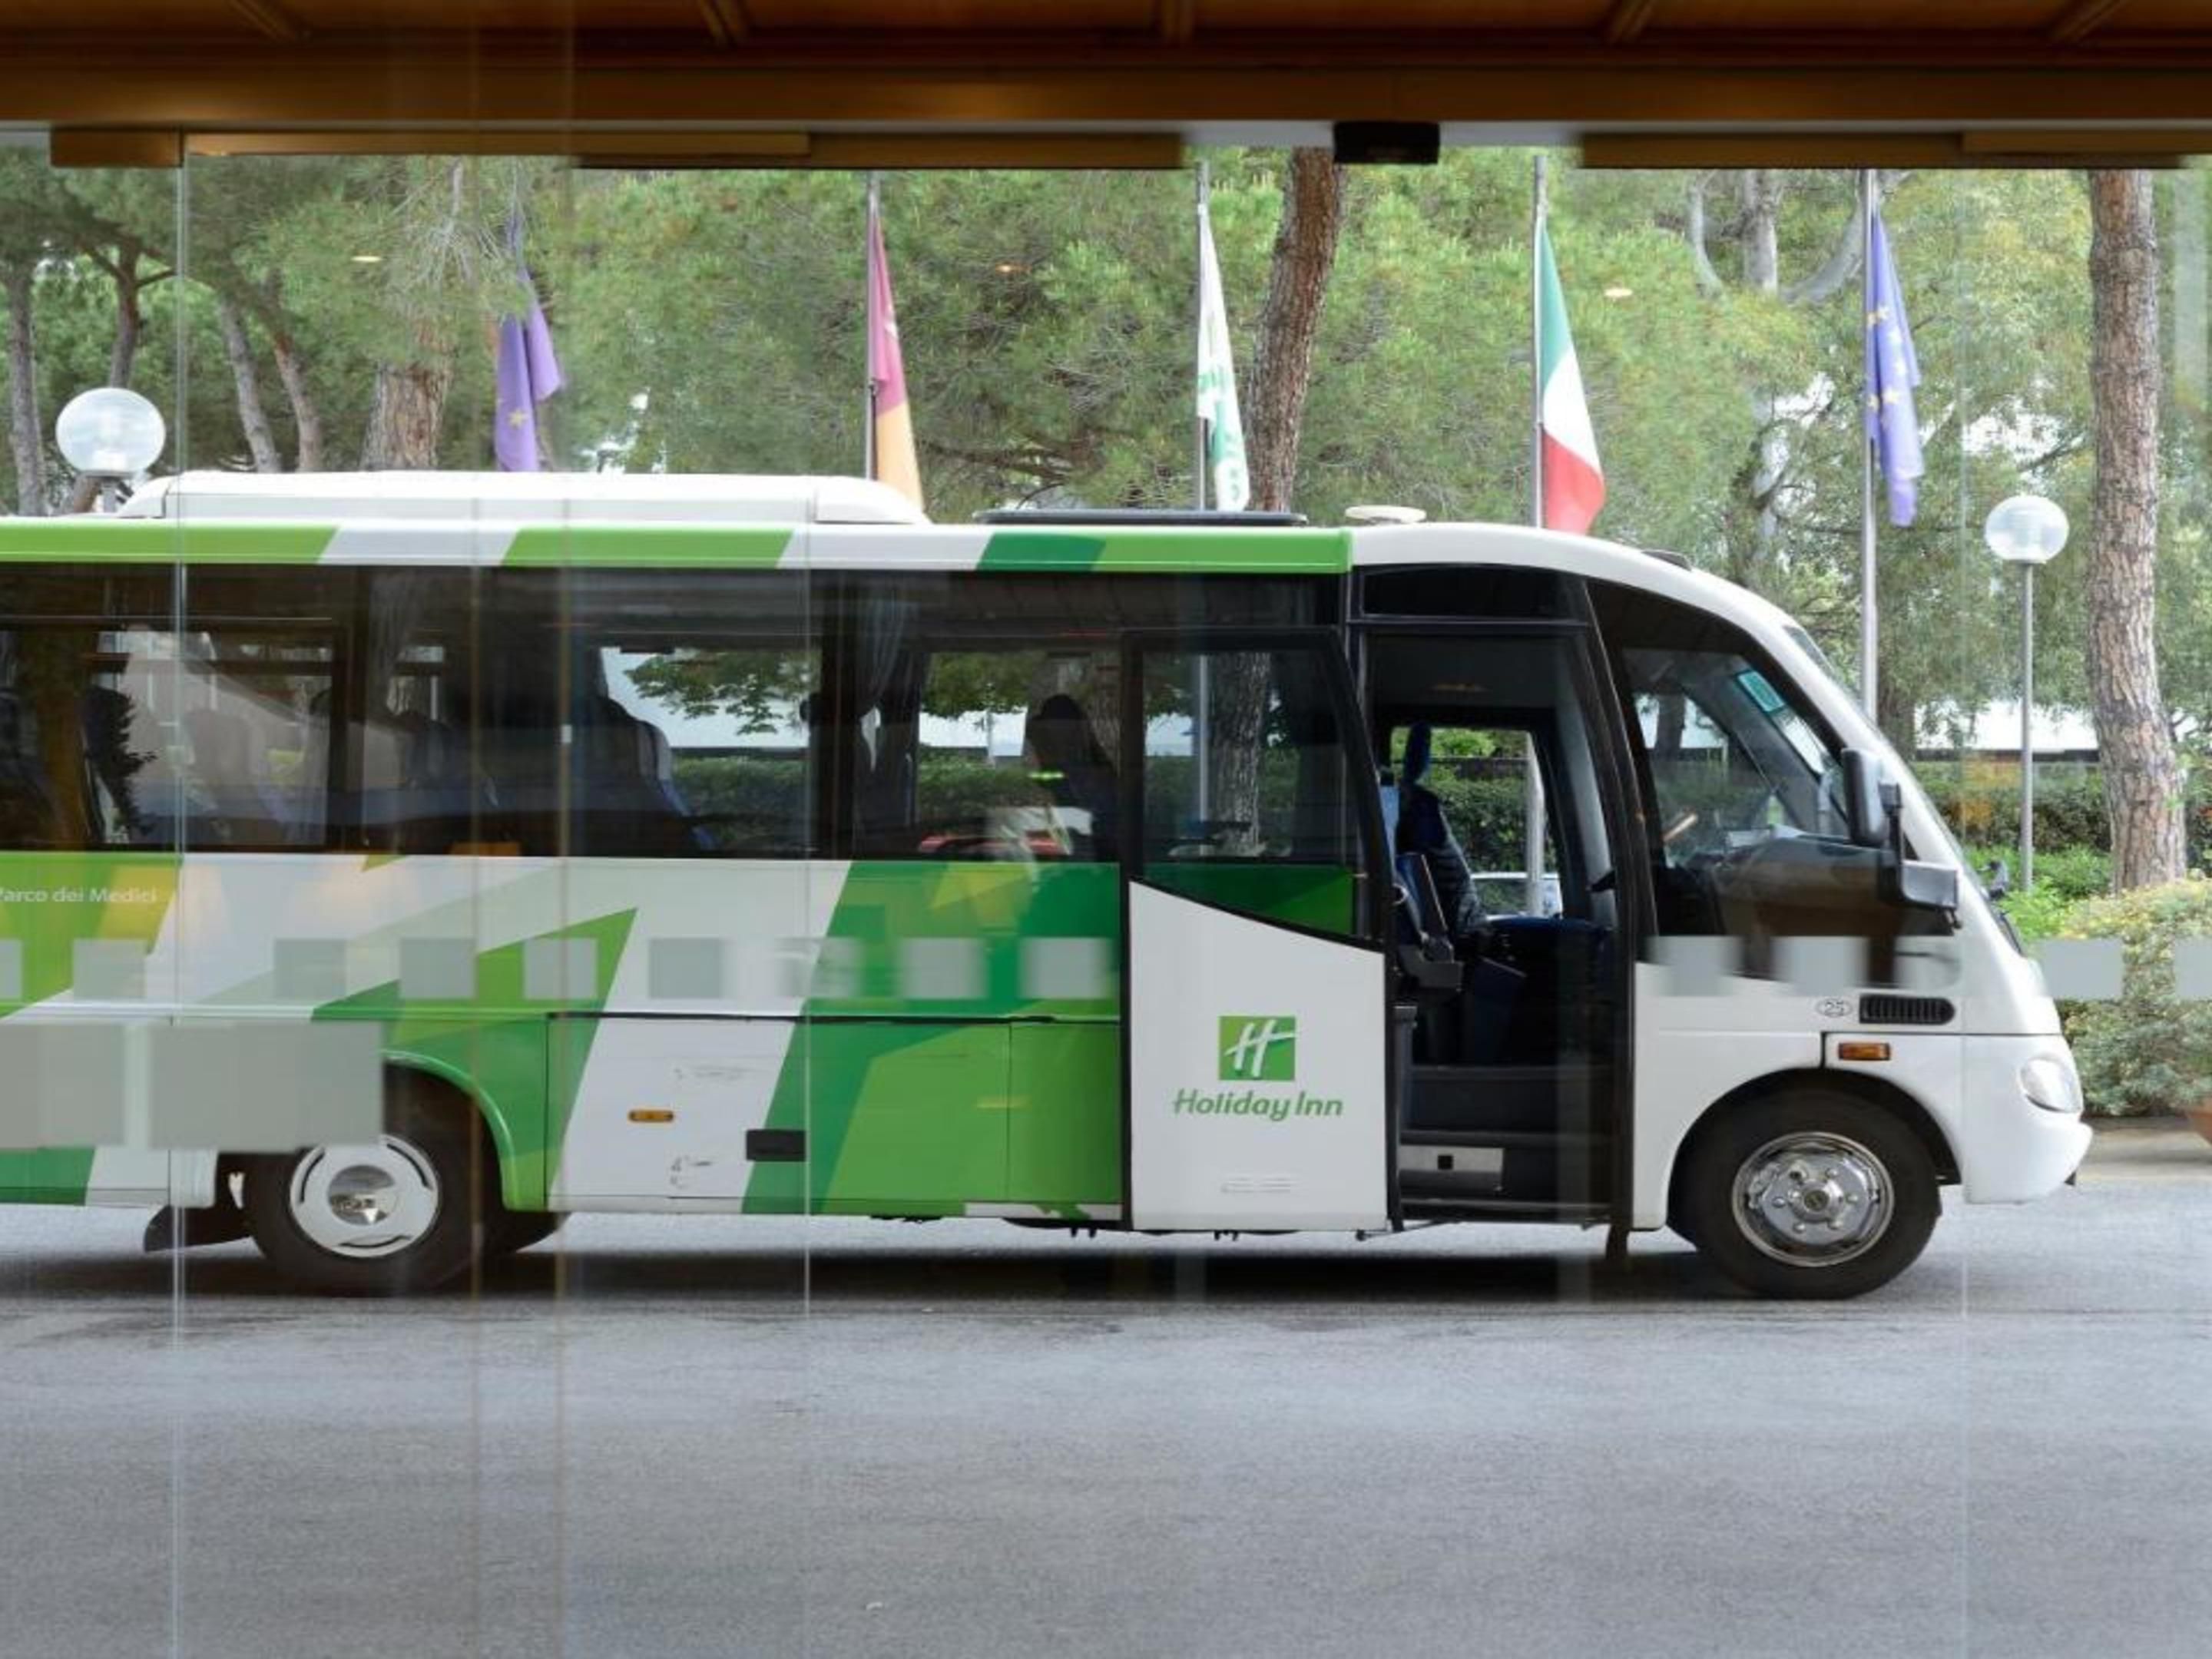 Travel with Holiday Inn Almaty. Comfortable transfer from the hotel for you and your loved ones!